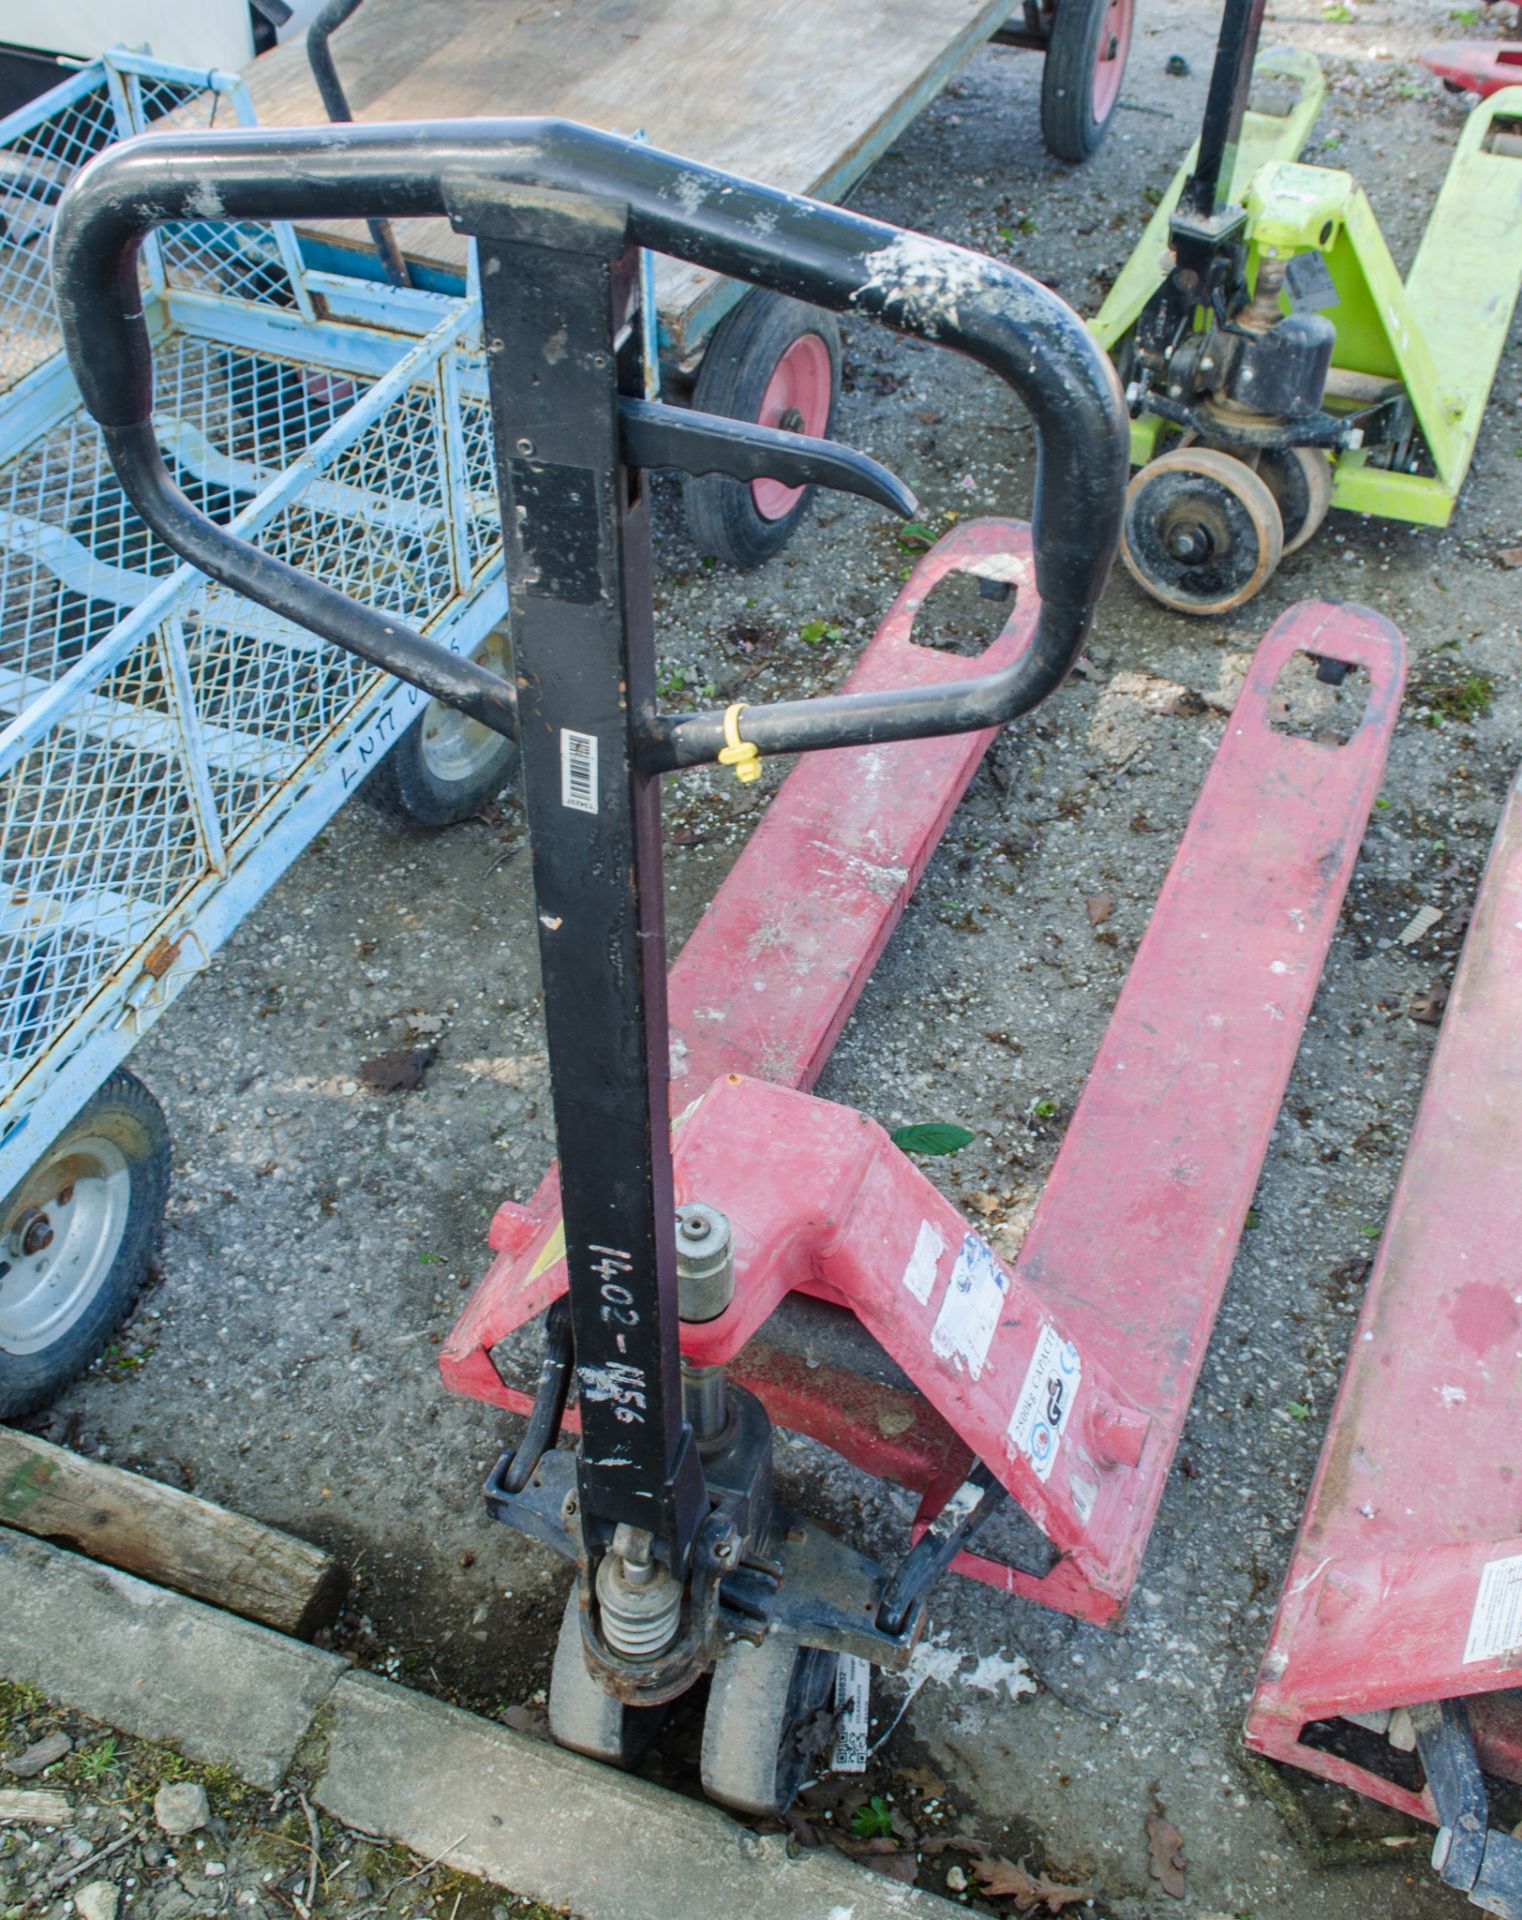 XL Lift hand hydraulic pallet truck 1402-1156 - Image 2 of 2